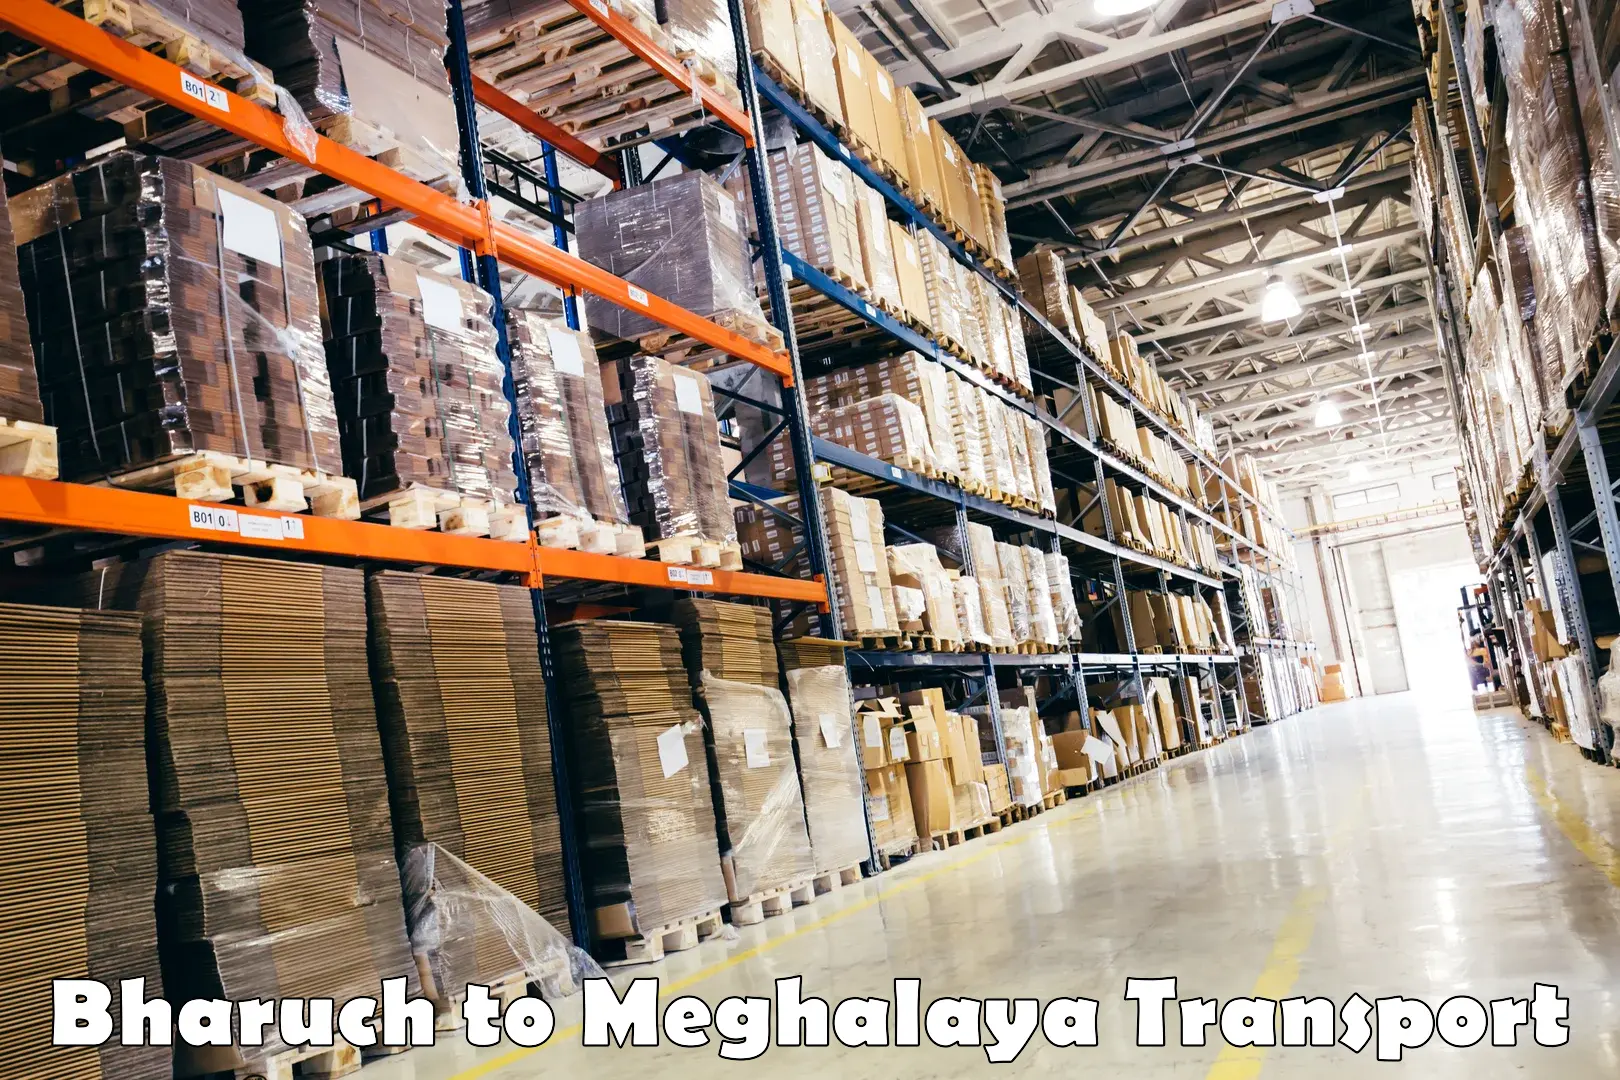 Truck transport companies in India Bharuch to Meghalaya